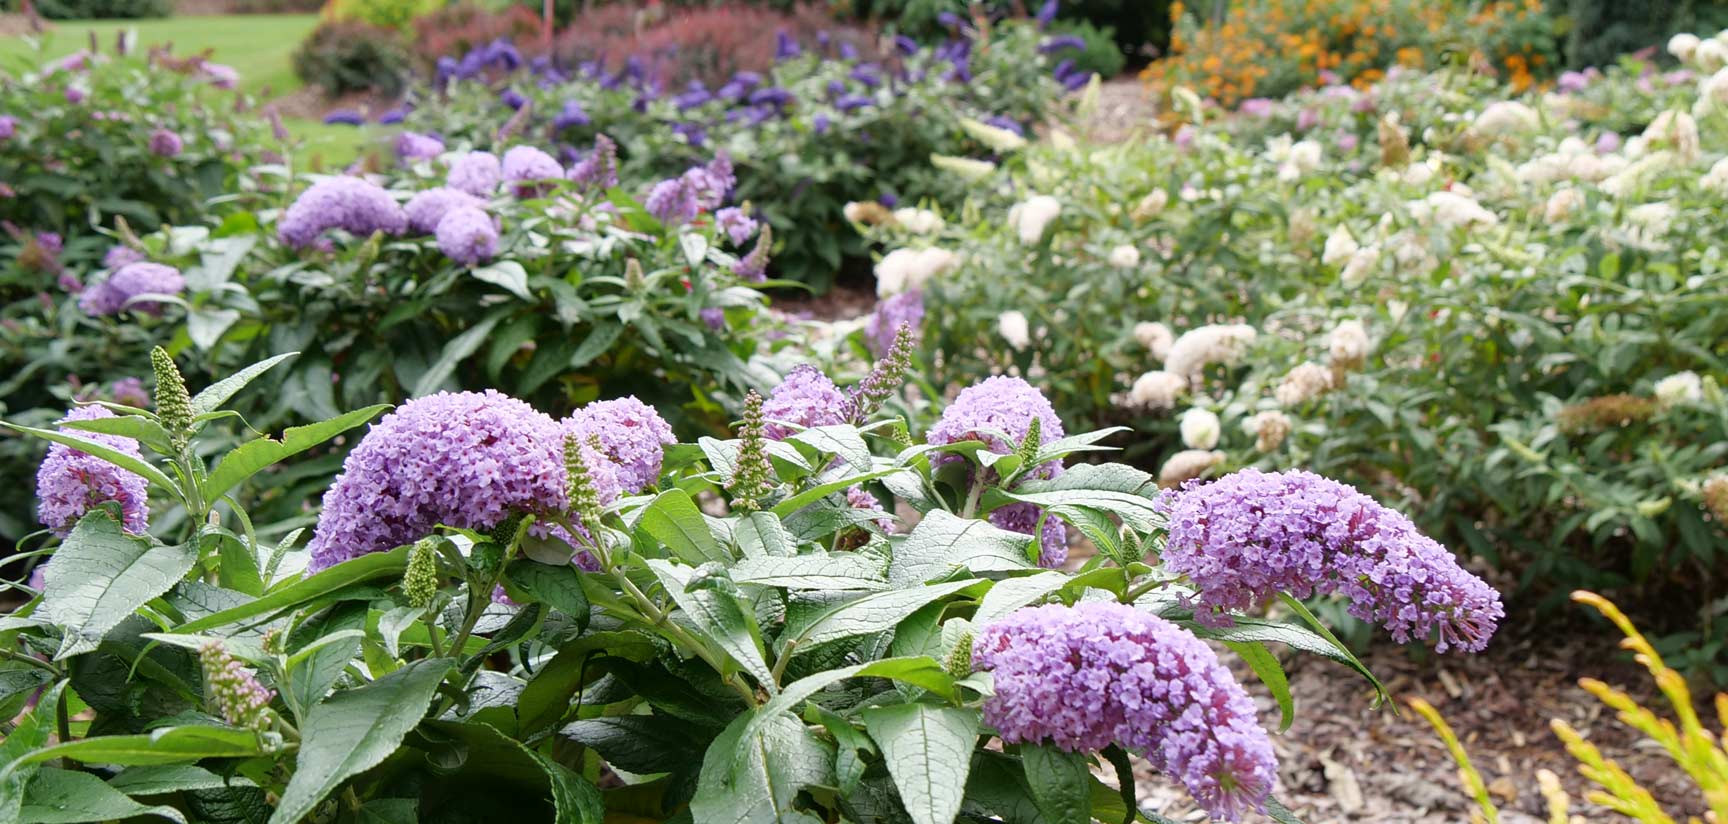 Purple and white butterfly bushes in a garden